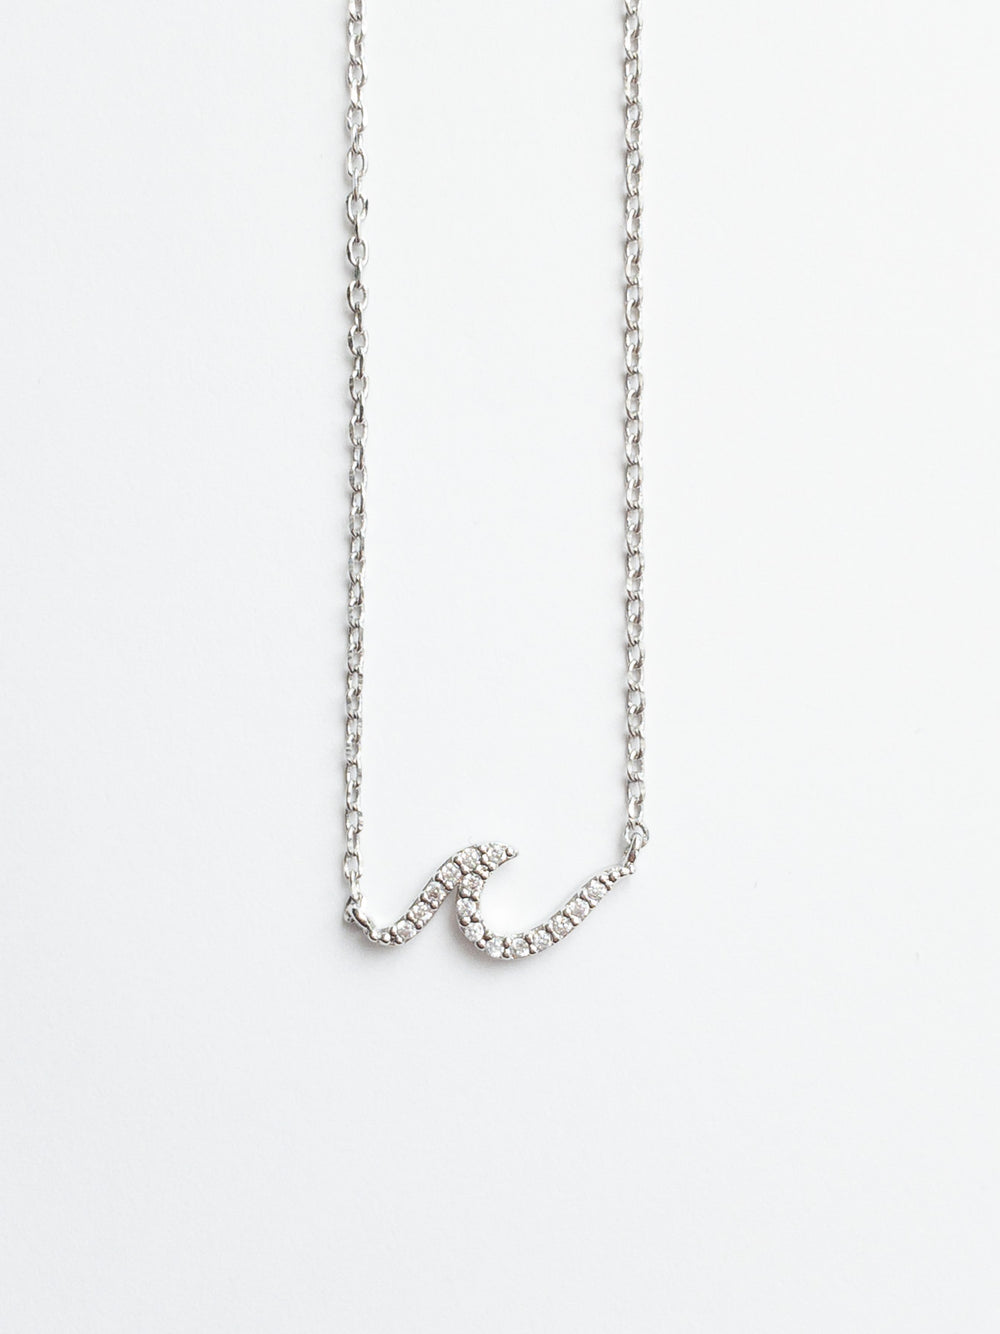 Avianna Large Crystal necklace in silver. sparkly wave